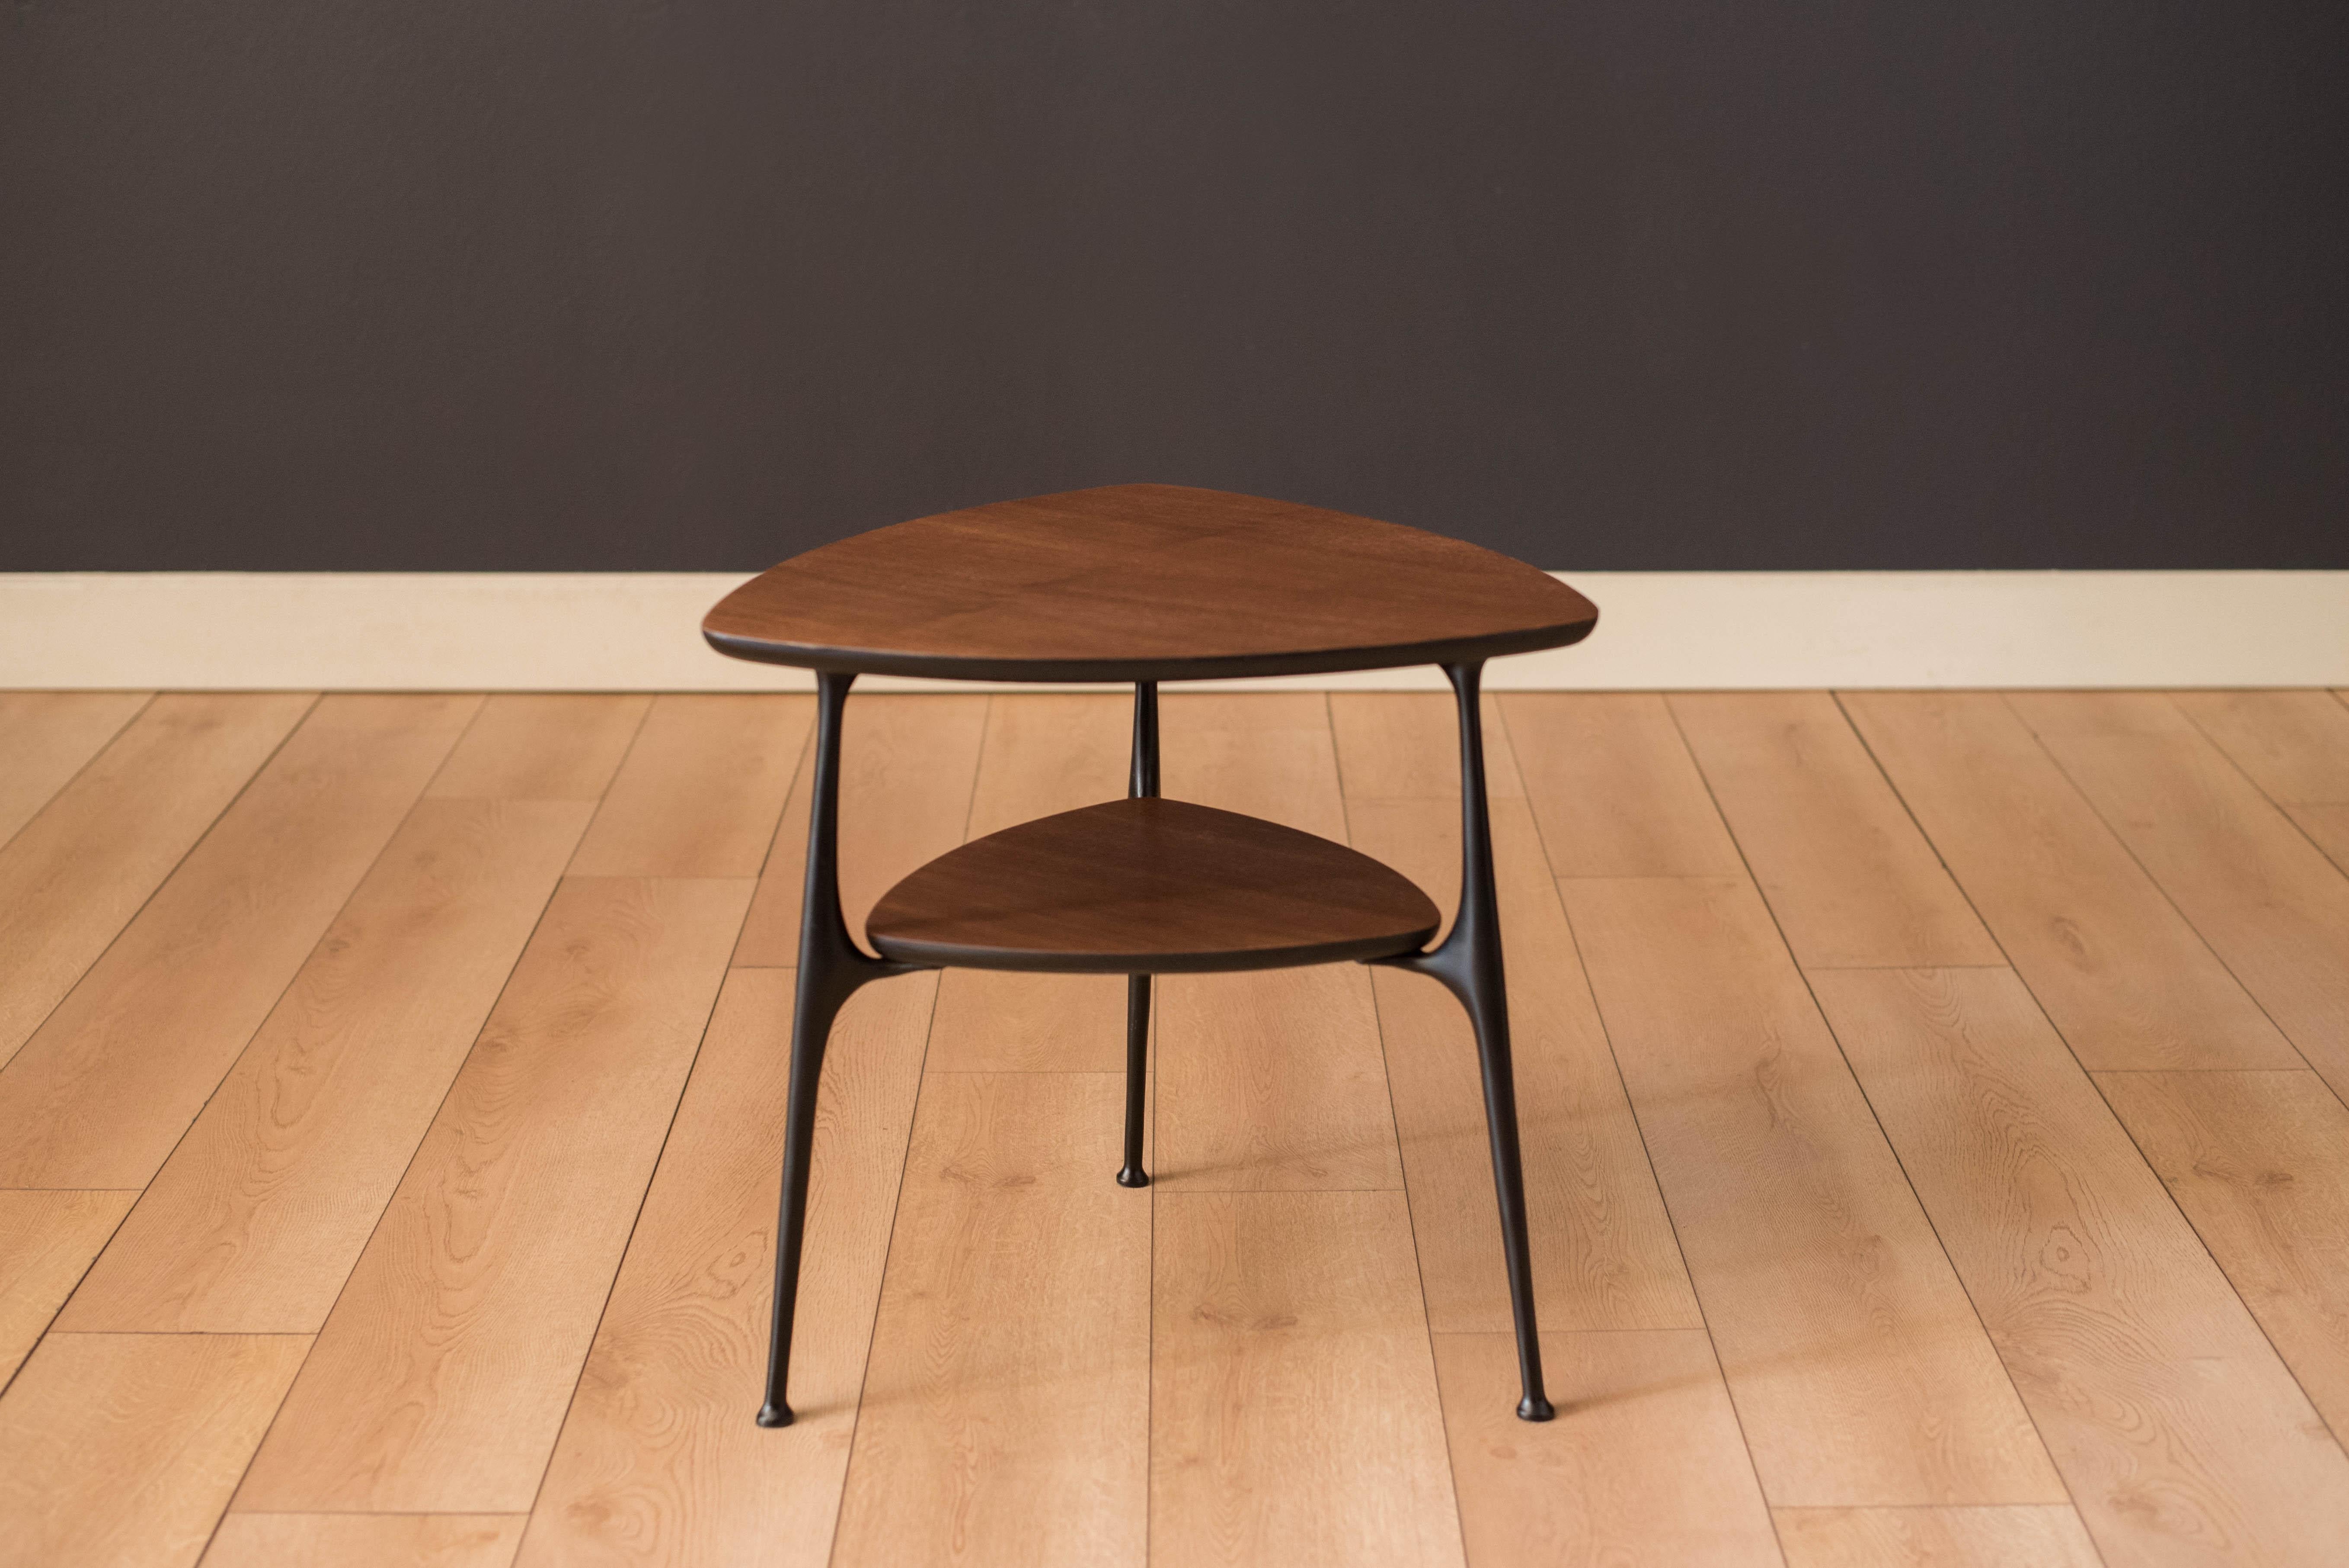 Cast Mid-Century Modern Two-Tier Triangle Black and Walnut End Table